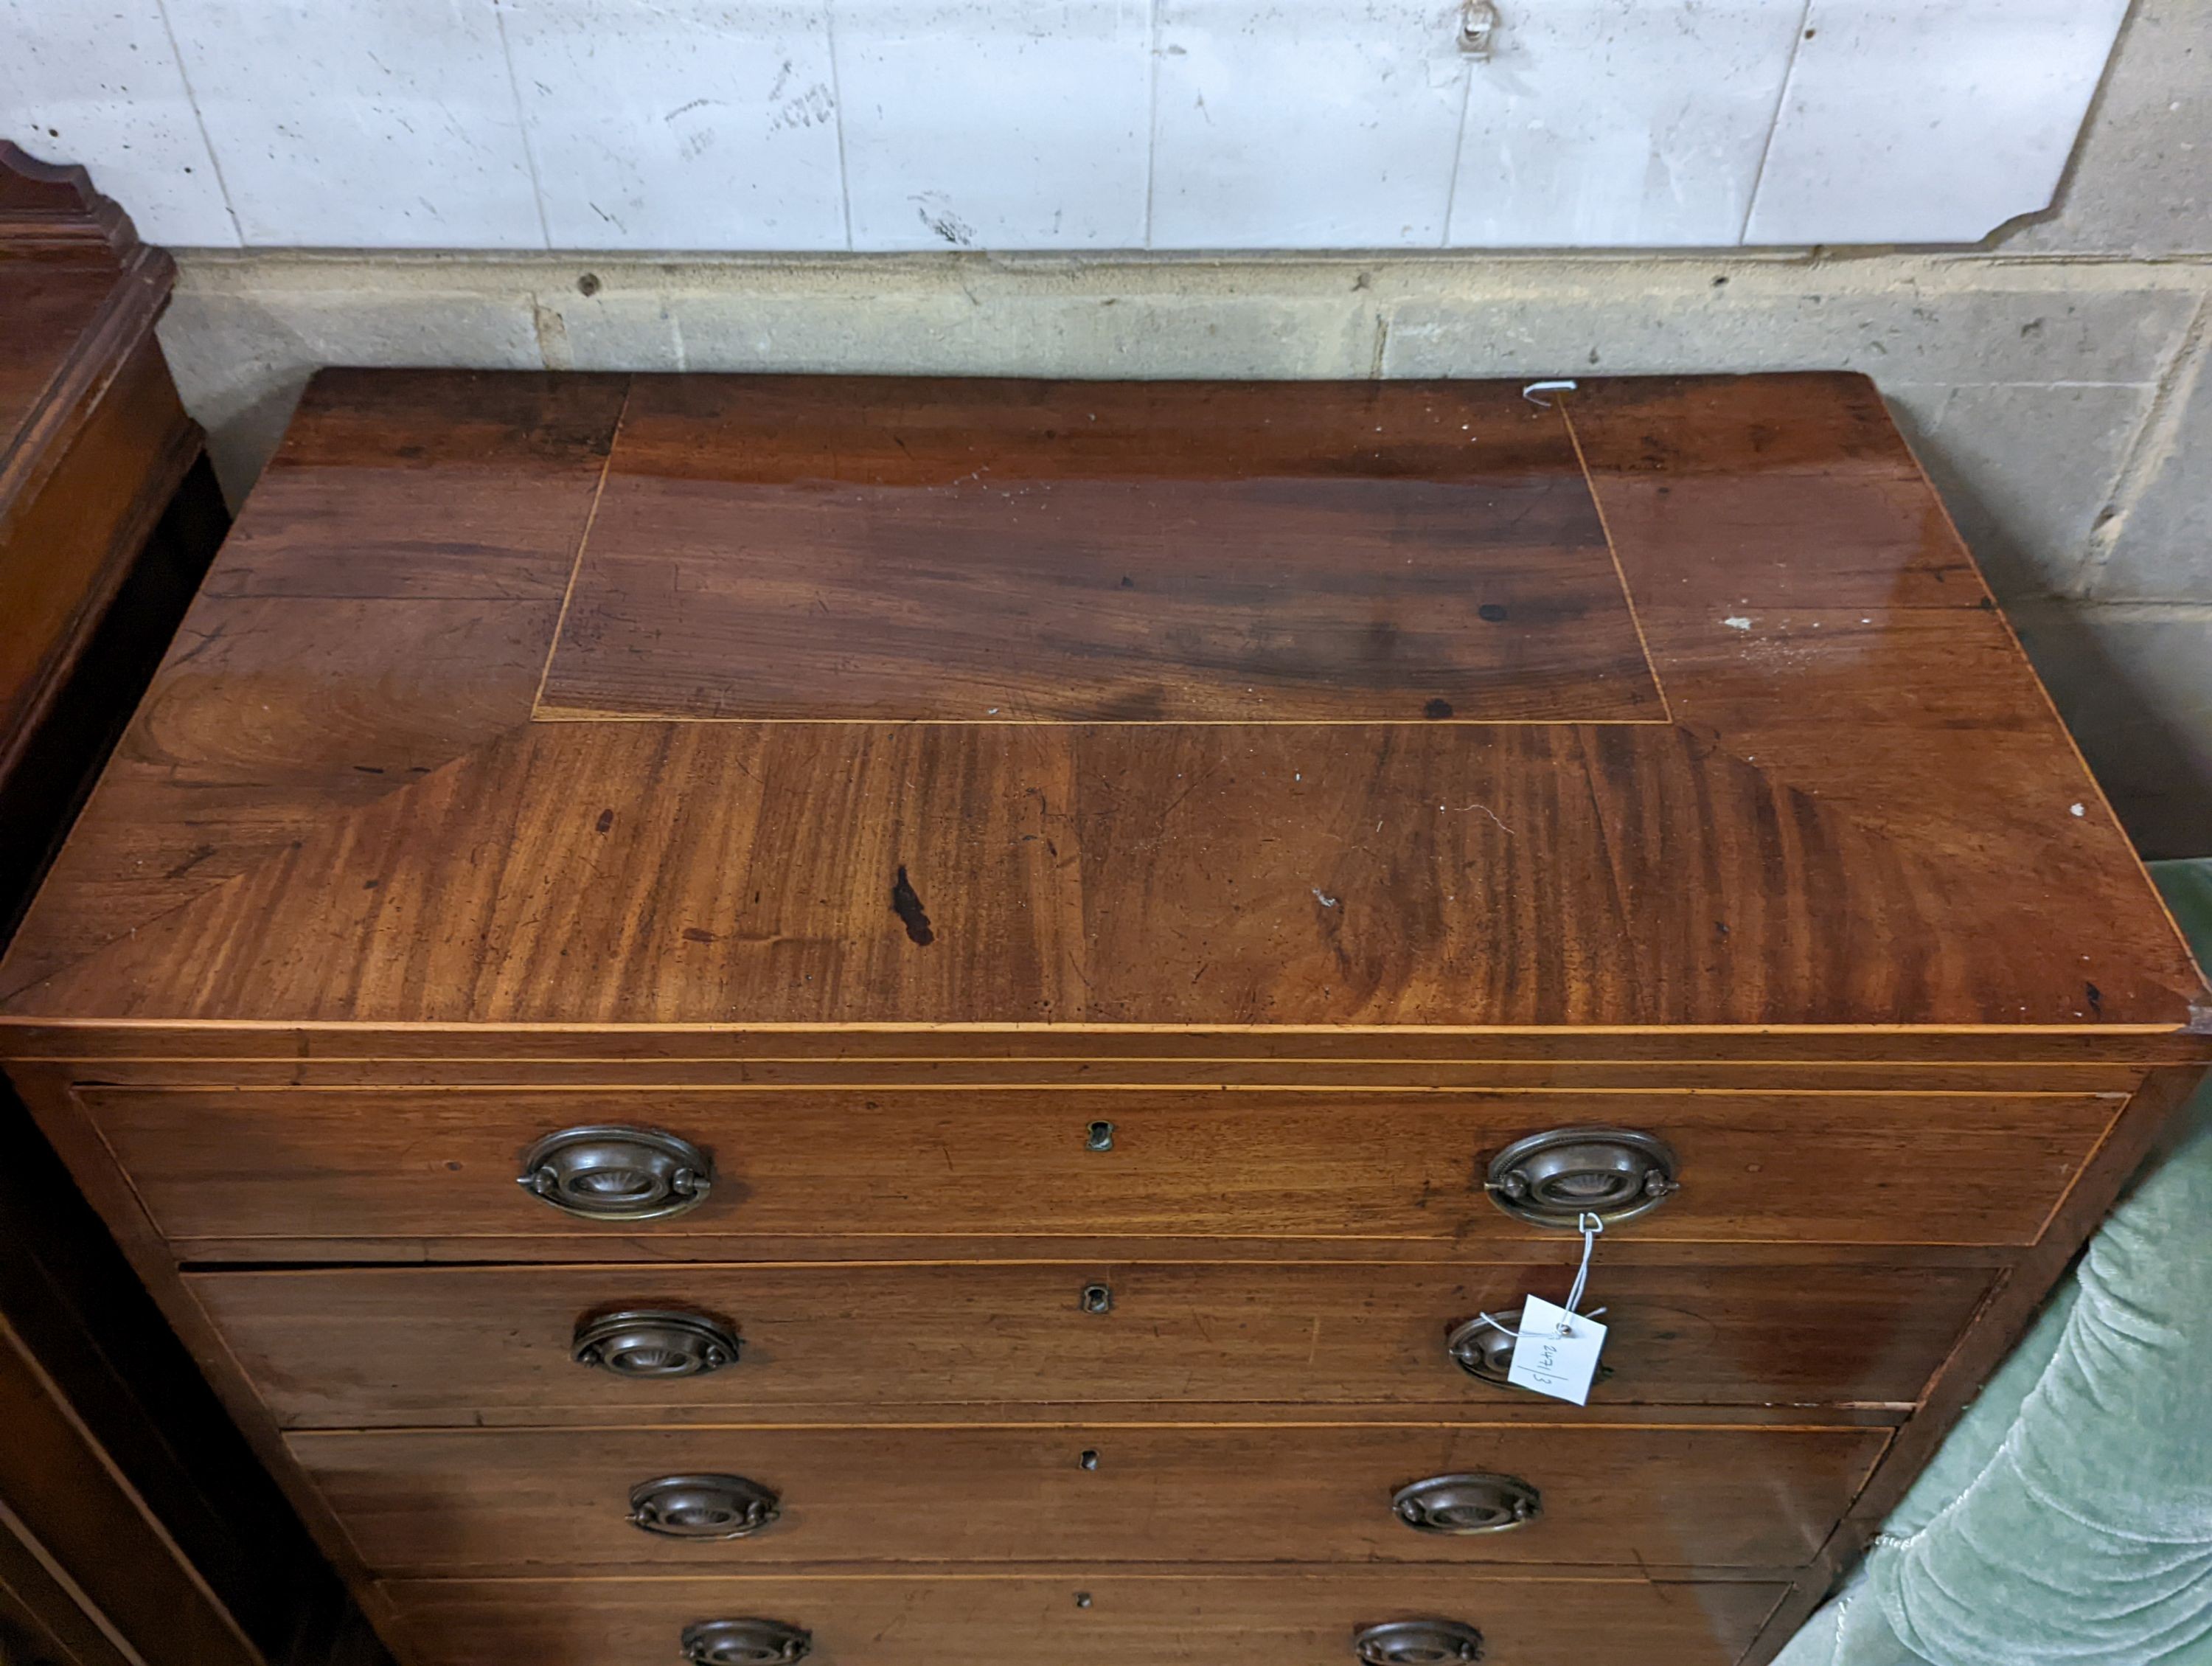 A small George IV mahogany four drawer chest, width 84cm, depth 45cm, height 86cm